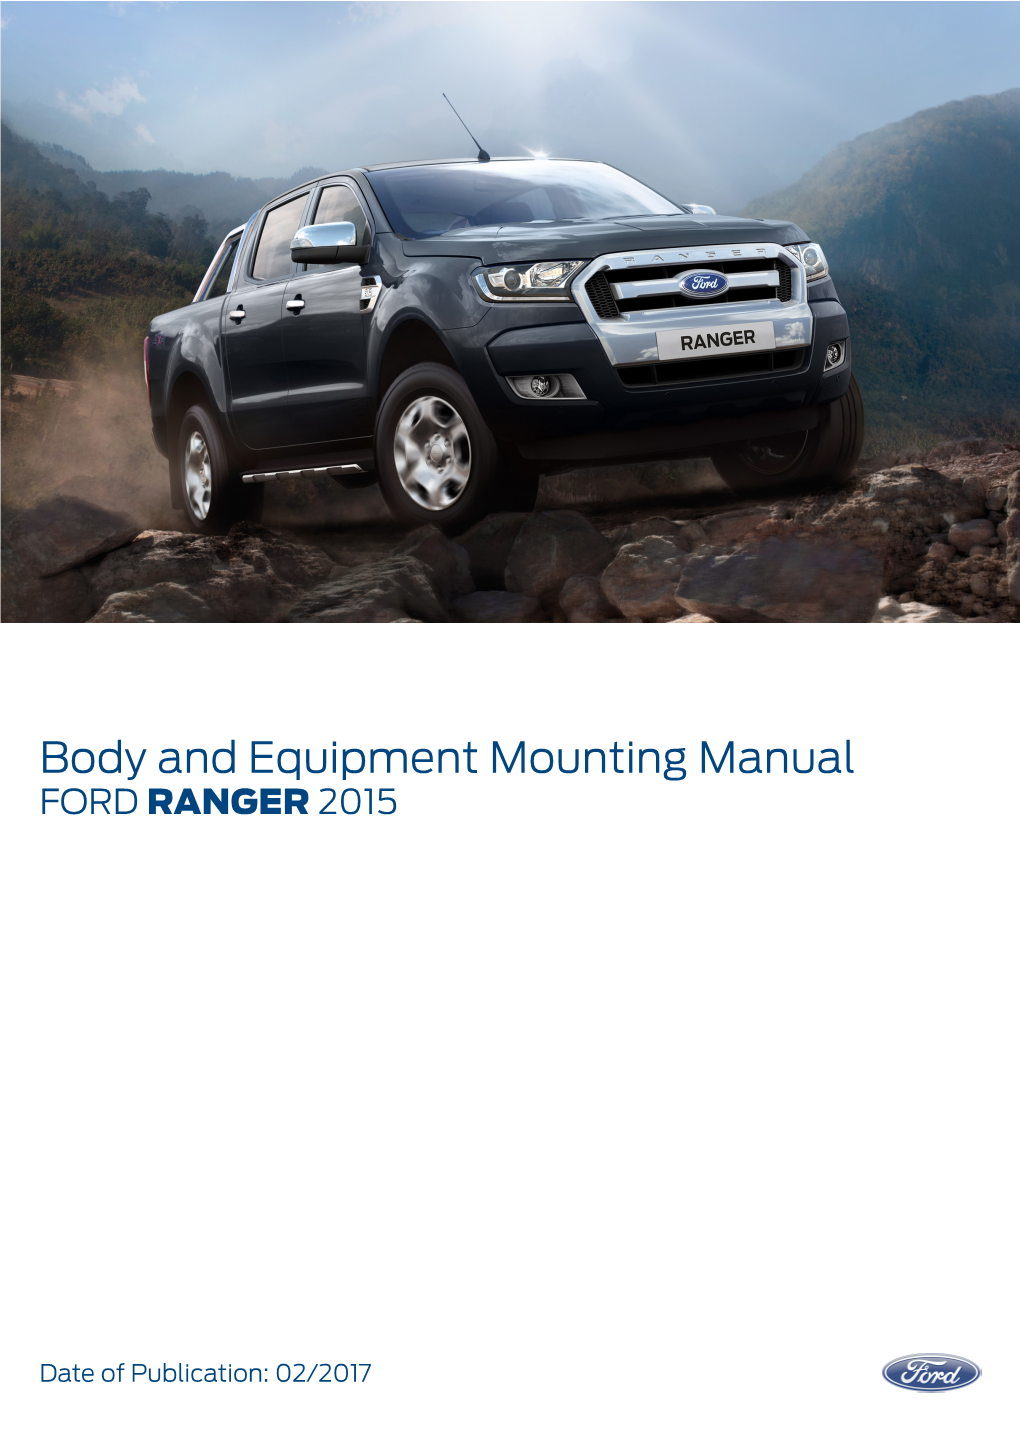 Body and Equipment Mounting Manual FORD RANGER 2015